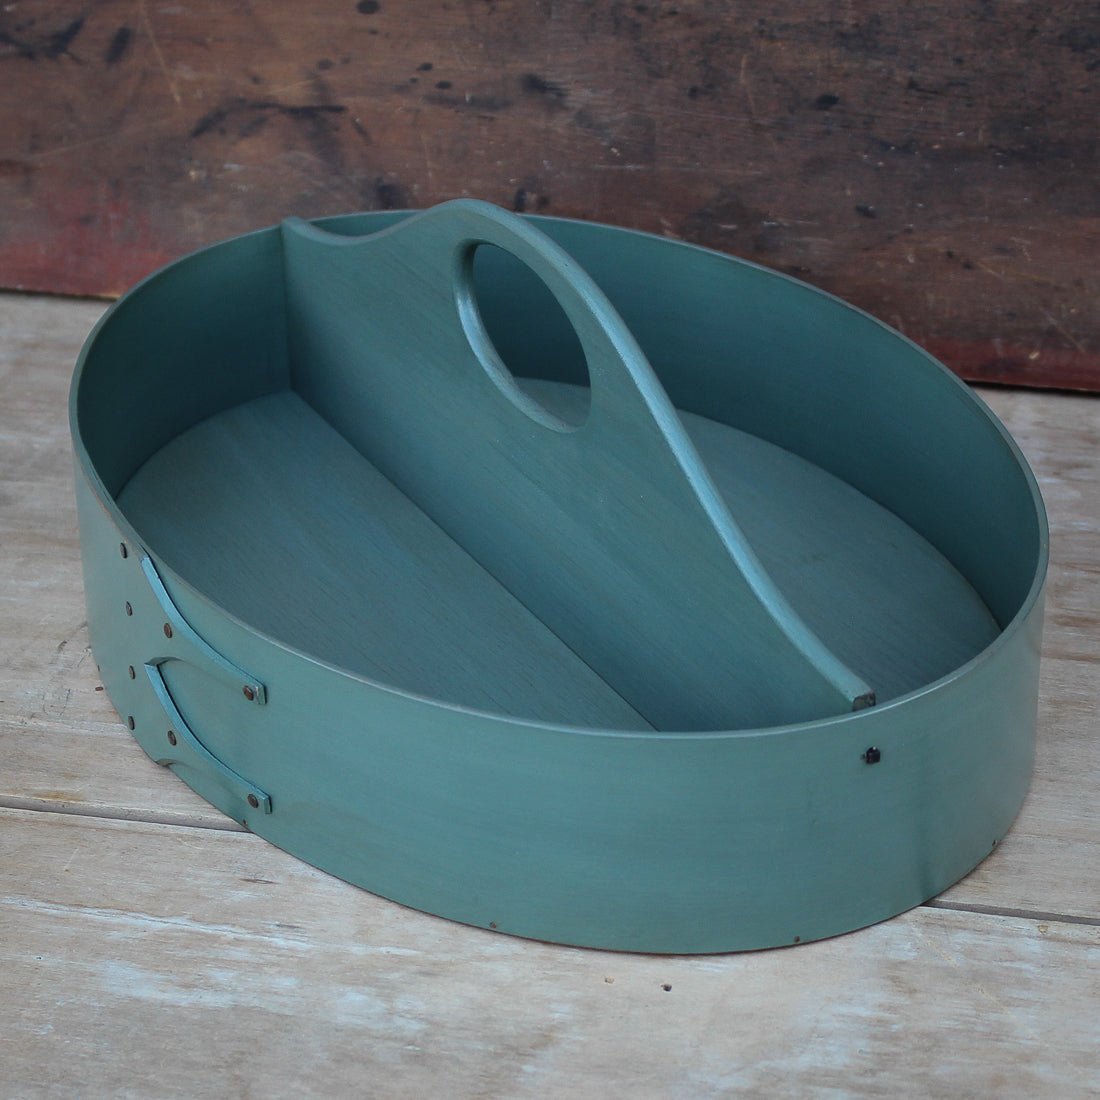 Shaker Style Divided Carrier, LeHays Shaker Boxes, Handcrafted in Maine, Sea Green Milk Paint Finish, Side View